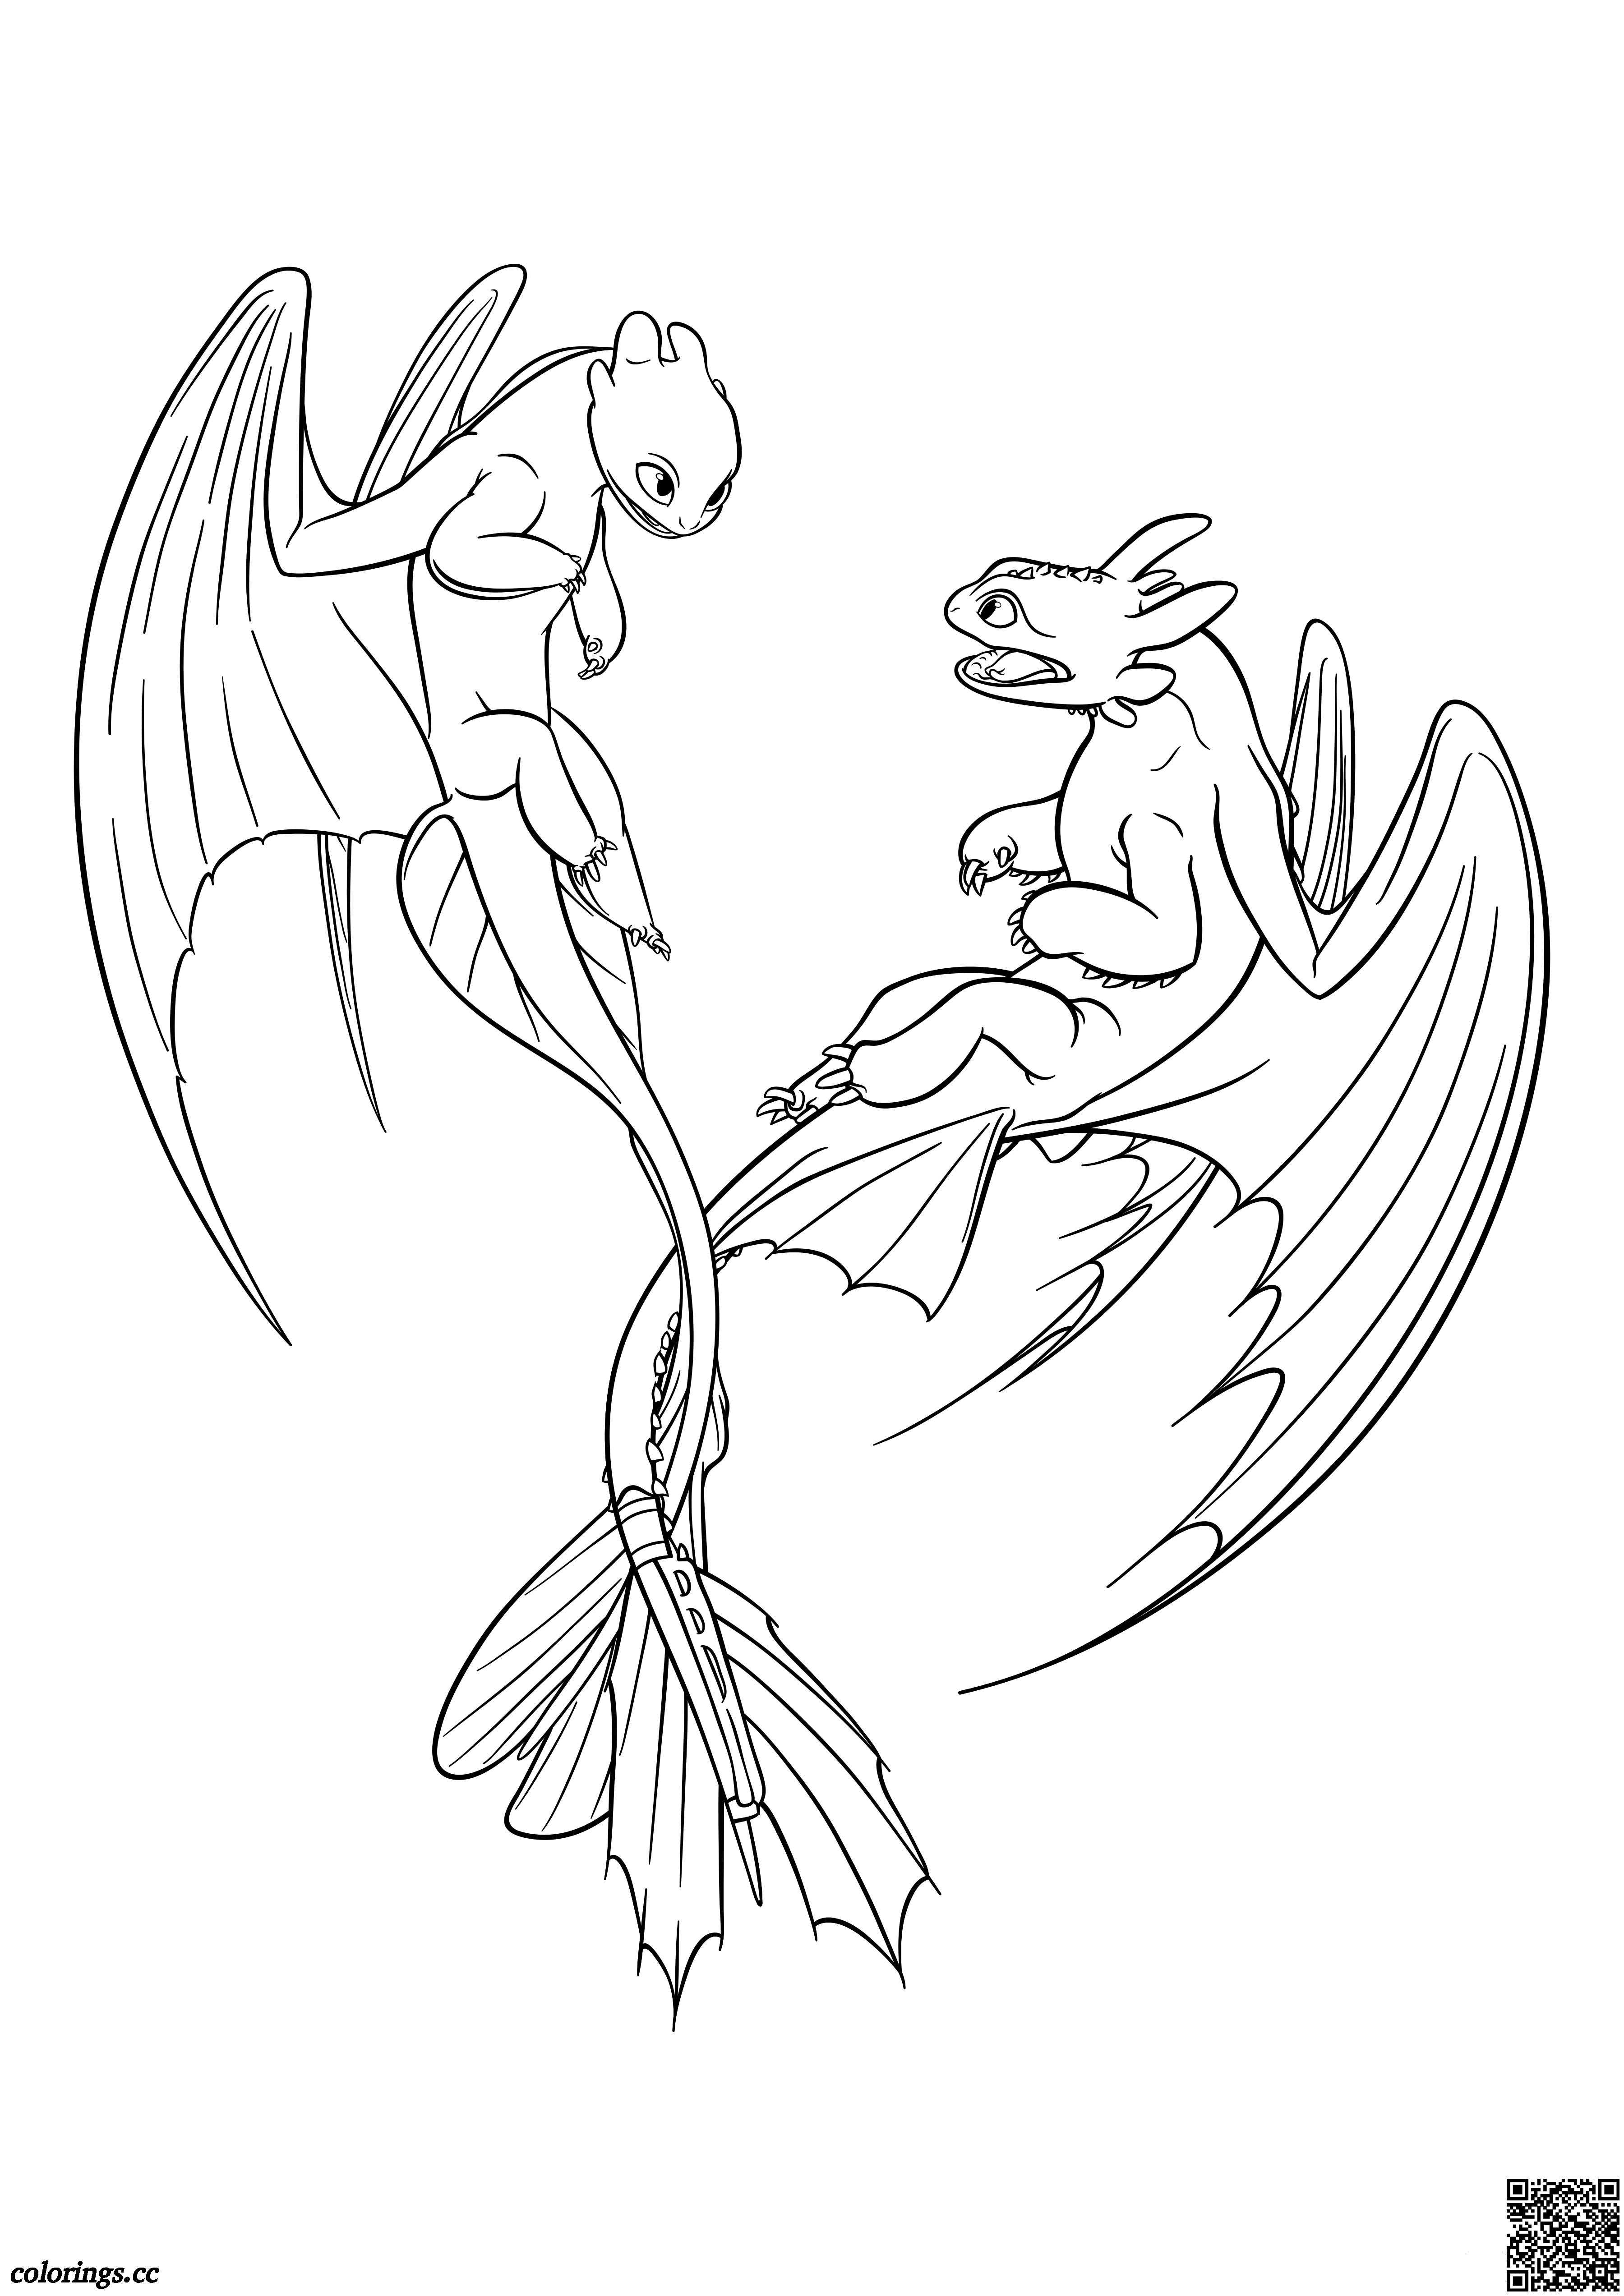 Light Fury and Toothless coloring pages, How to Train Your Dragon 3